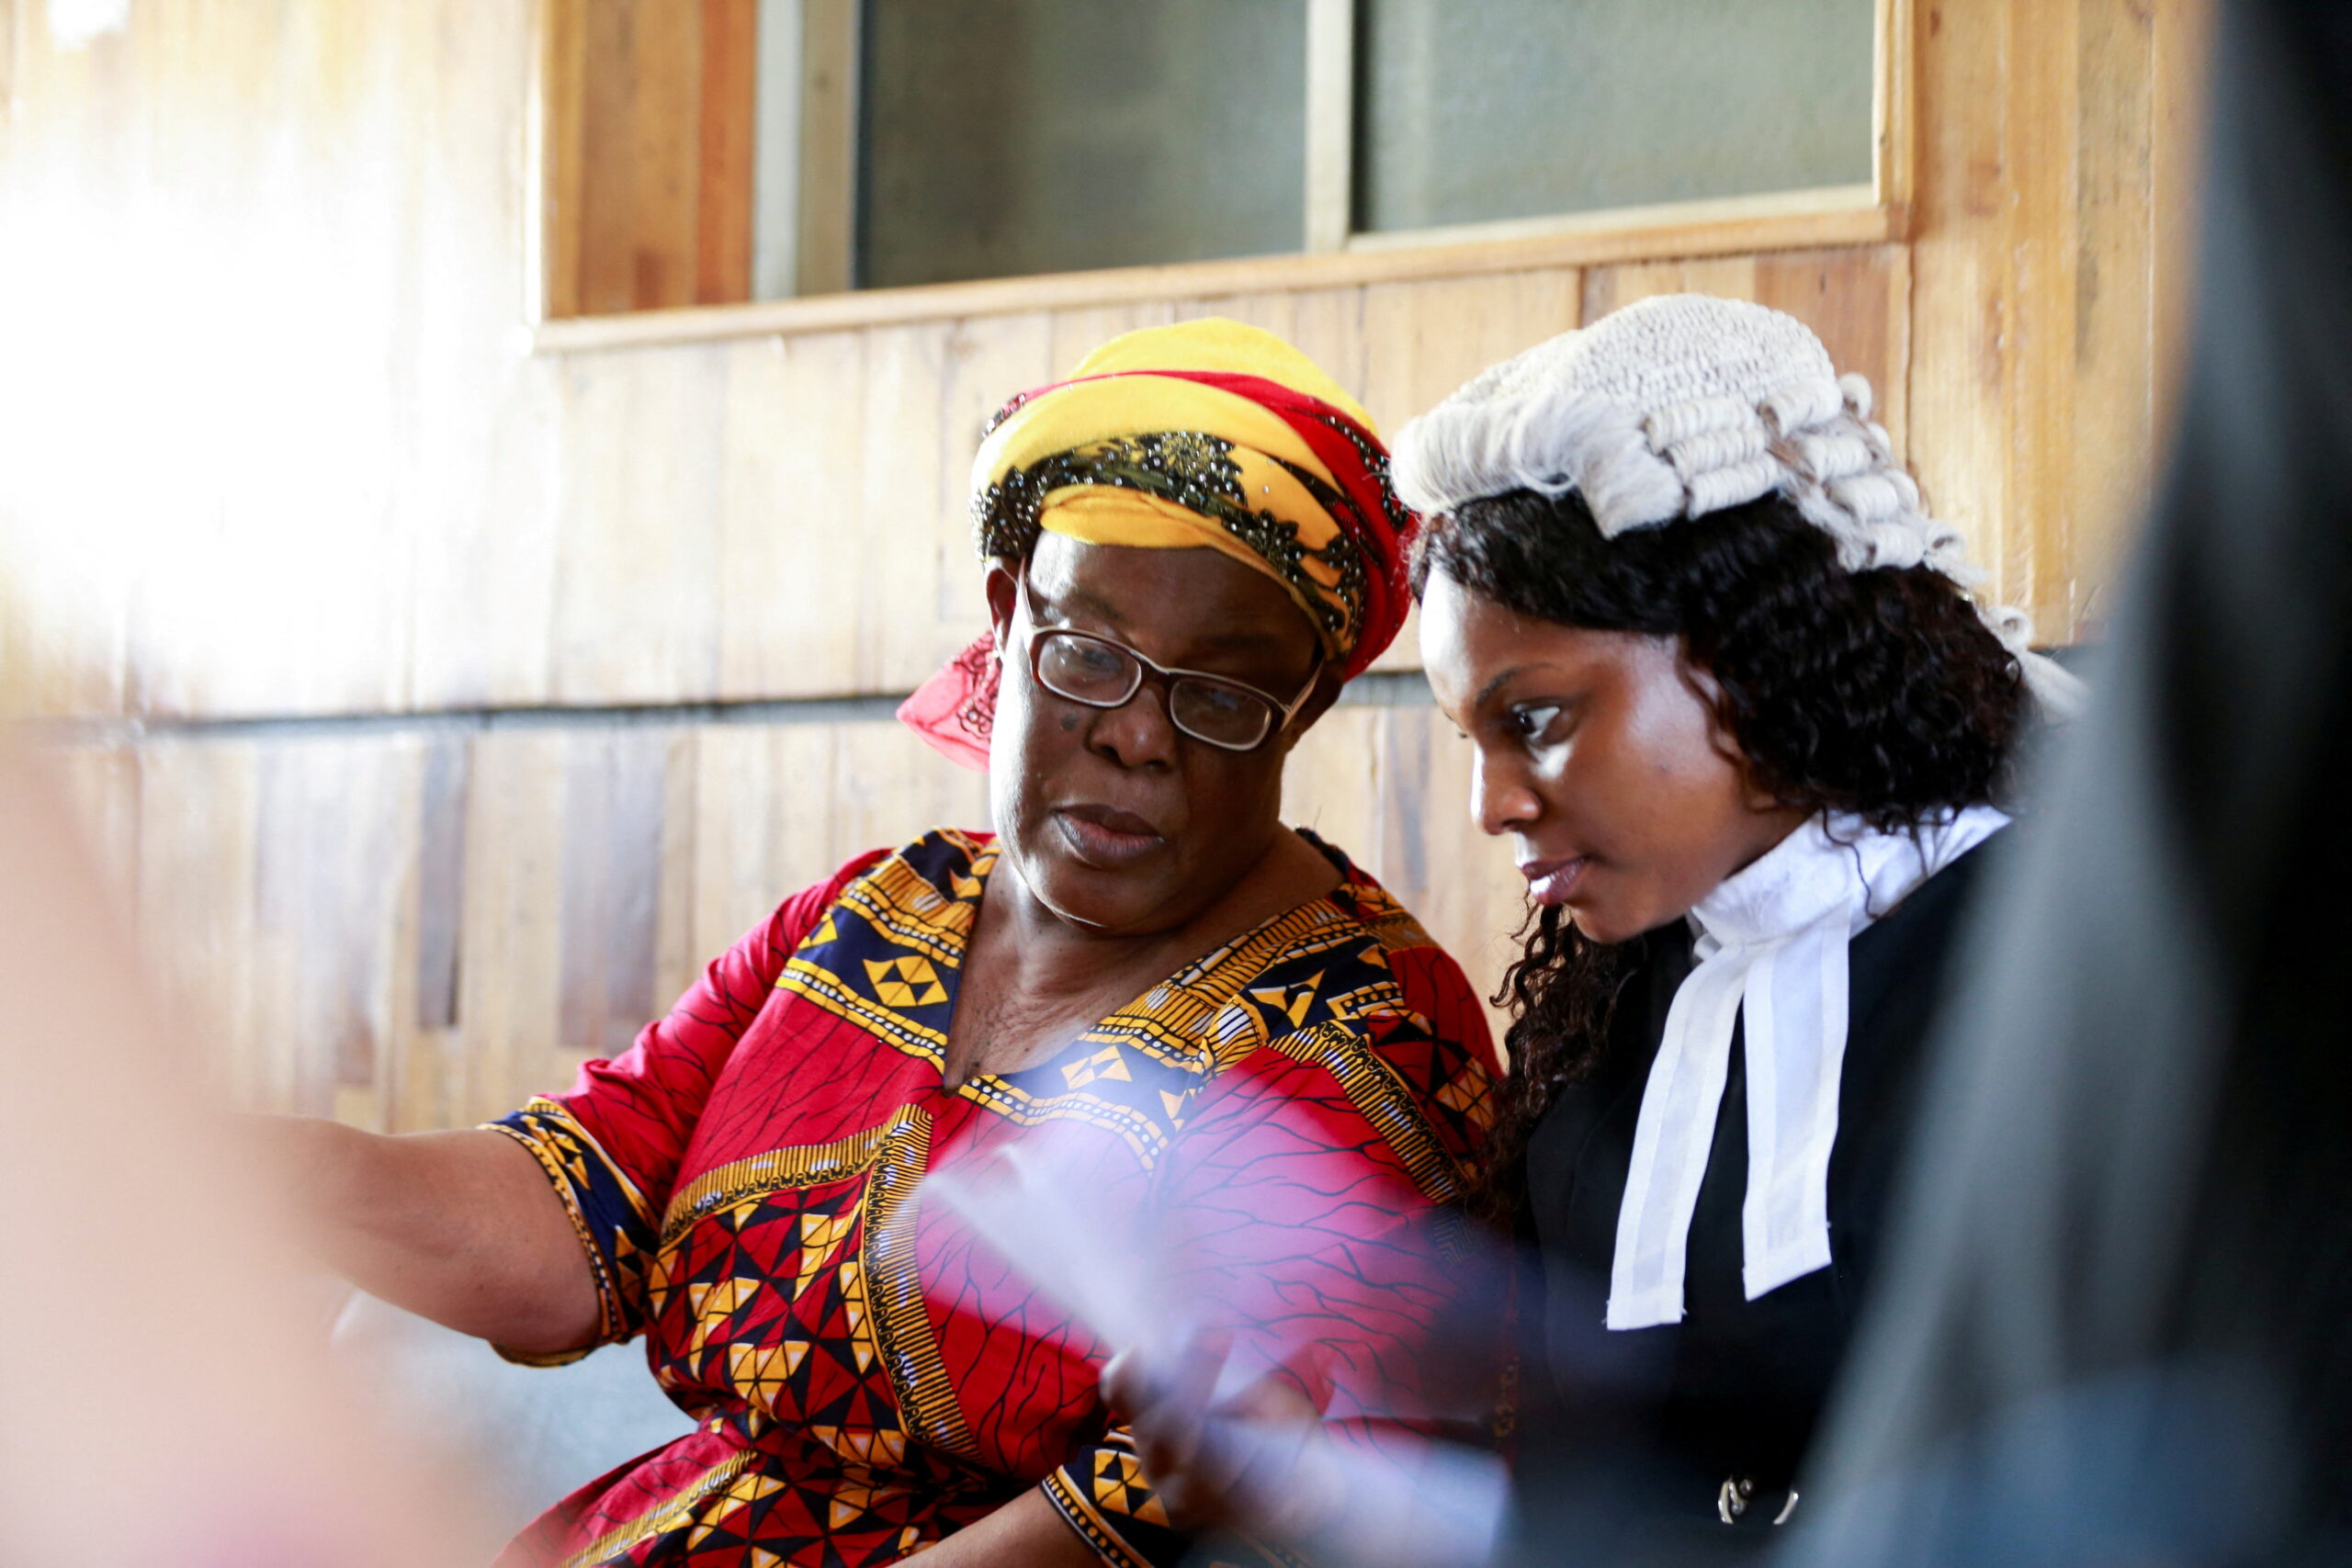 A woman lawyer talking to her client at court